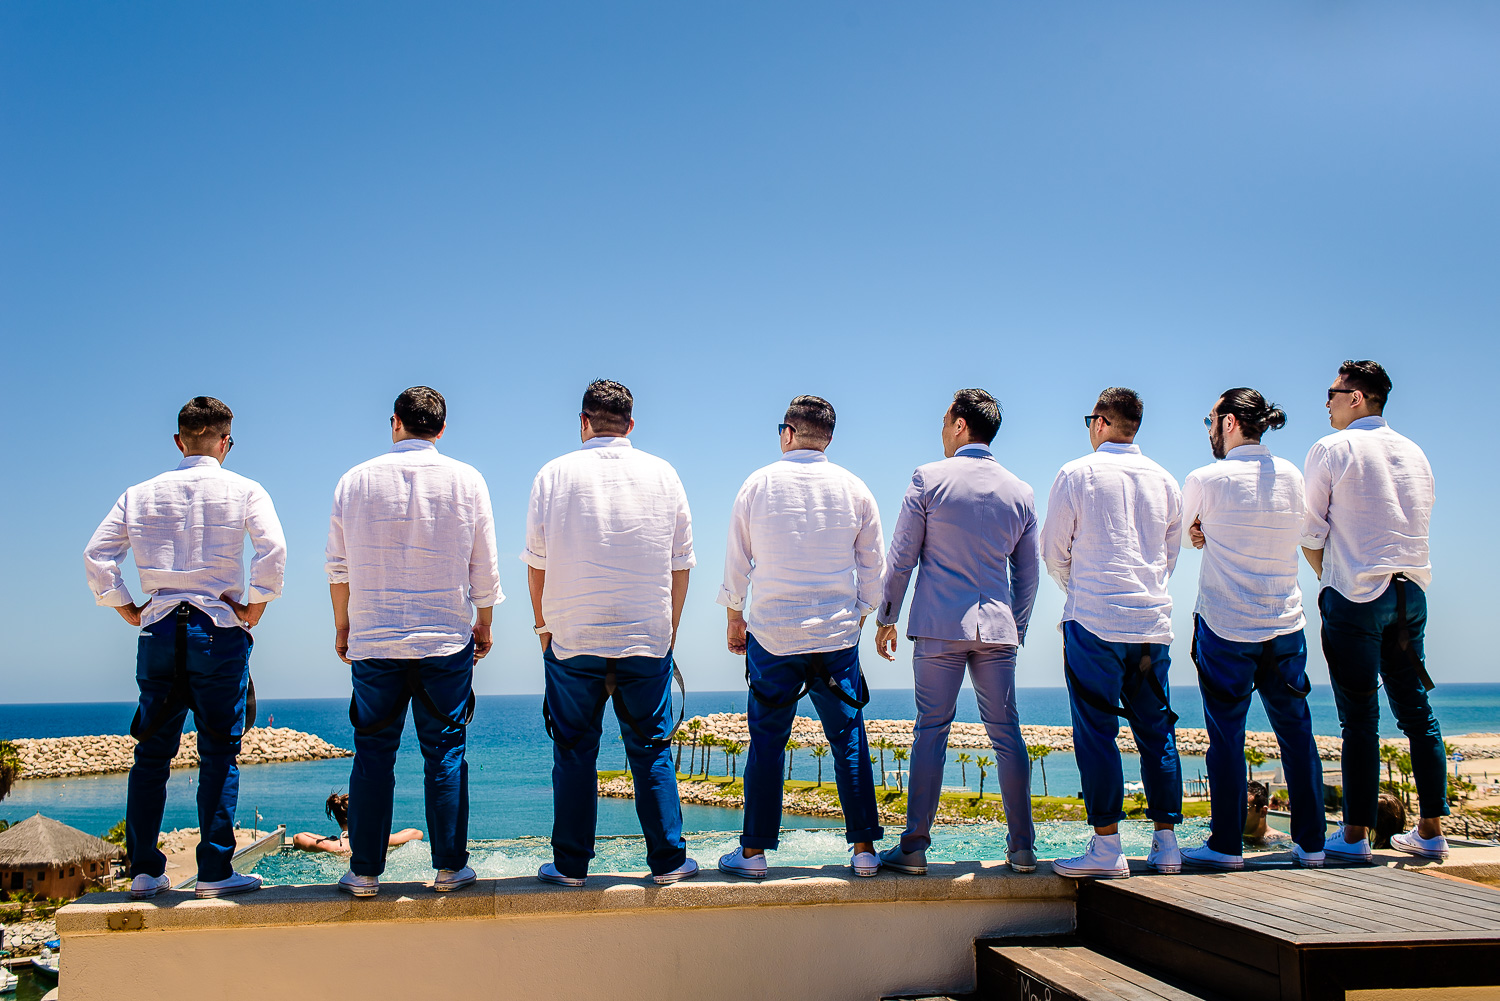  Groom with his friends are looking stunning wearing blue pants and white shirts, everybody is looking to the ocean destination wedding of the wonderful couple Cije and Jose at the beautiful El Ganzo, Mexico. GVphotographer is an amazing destination 